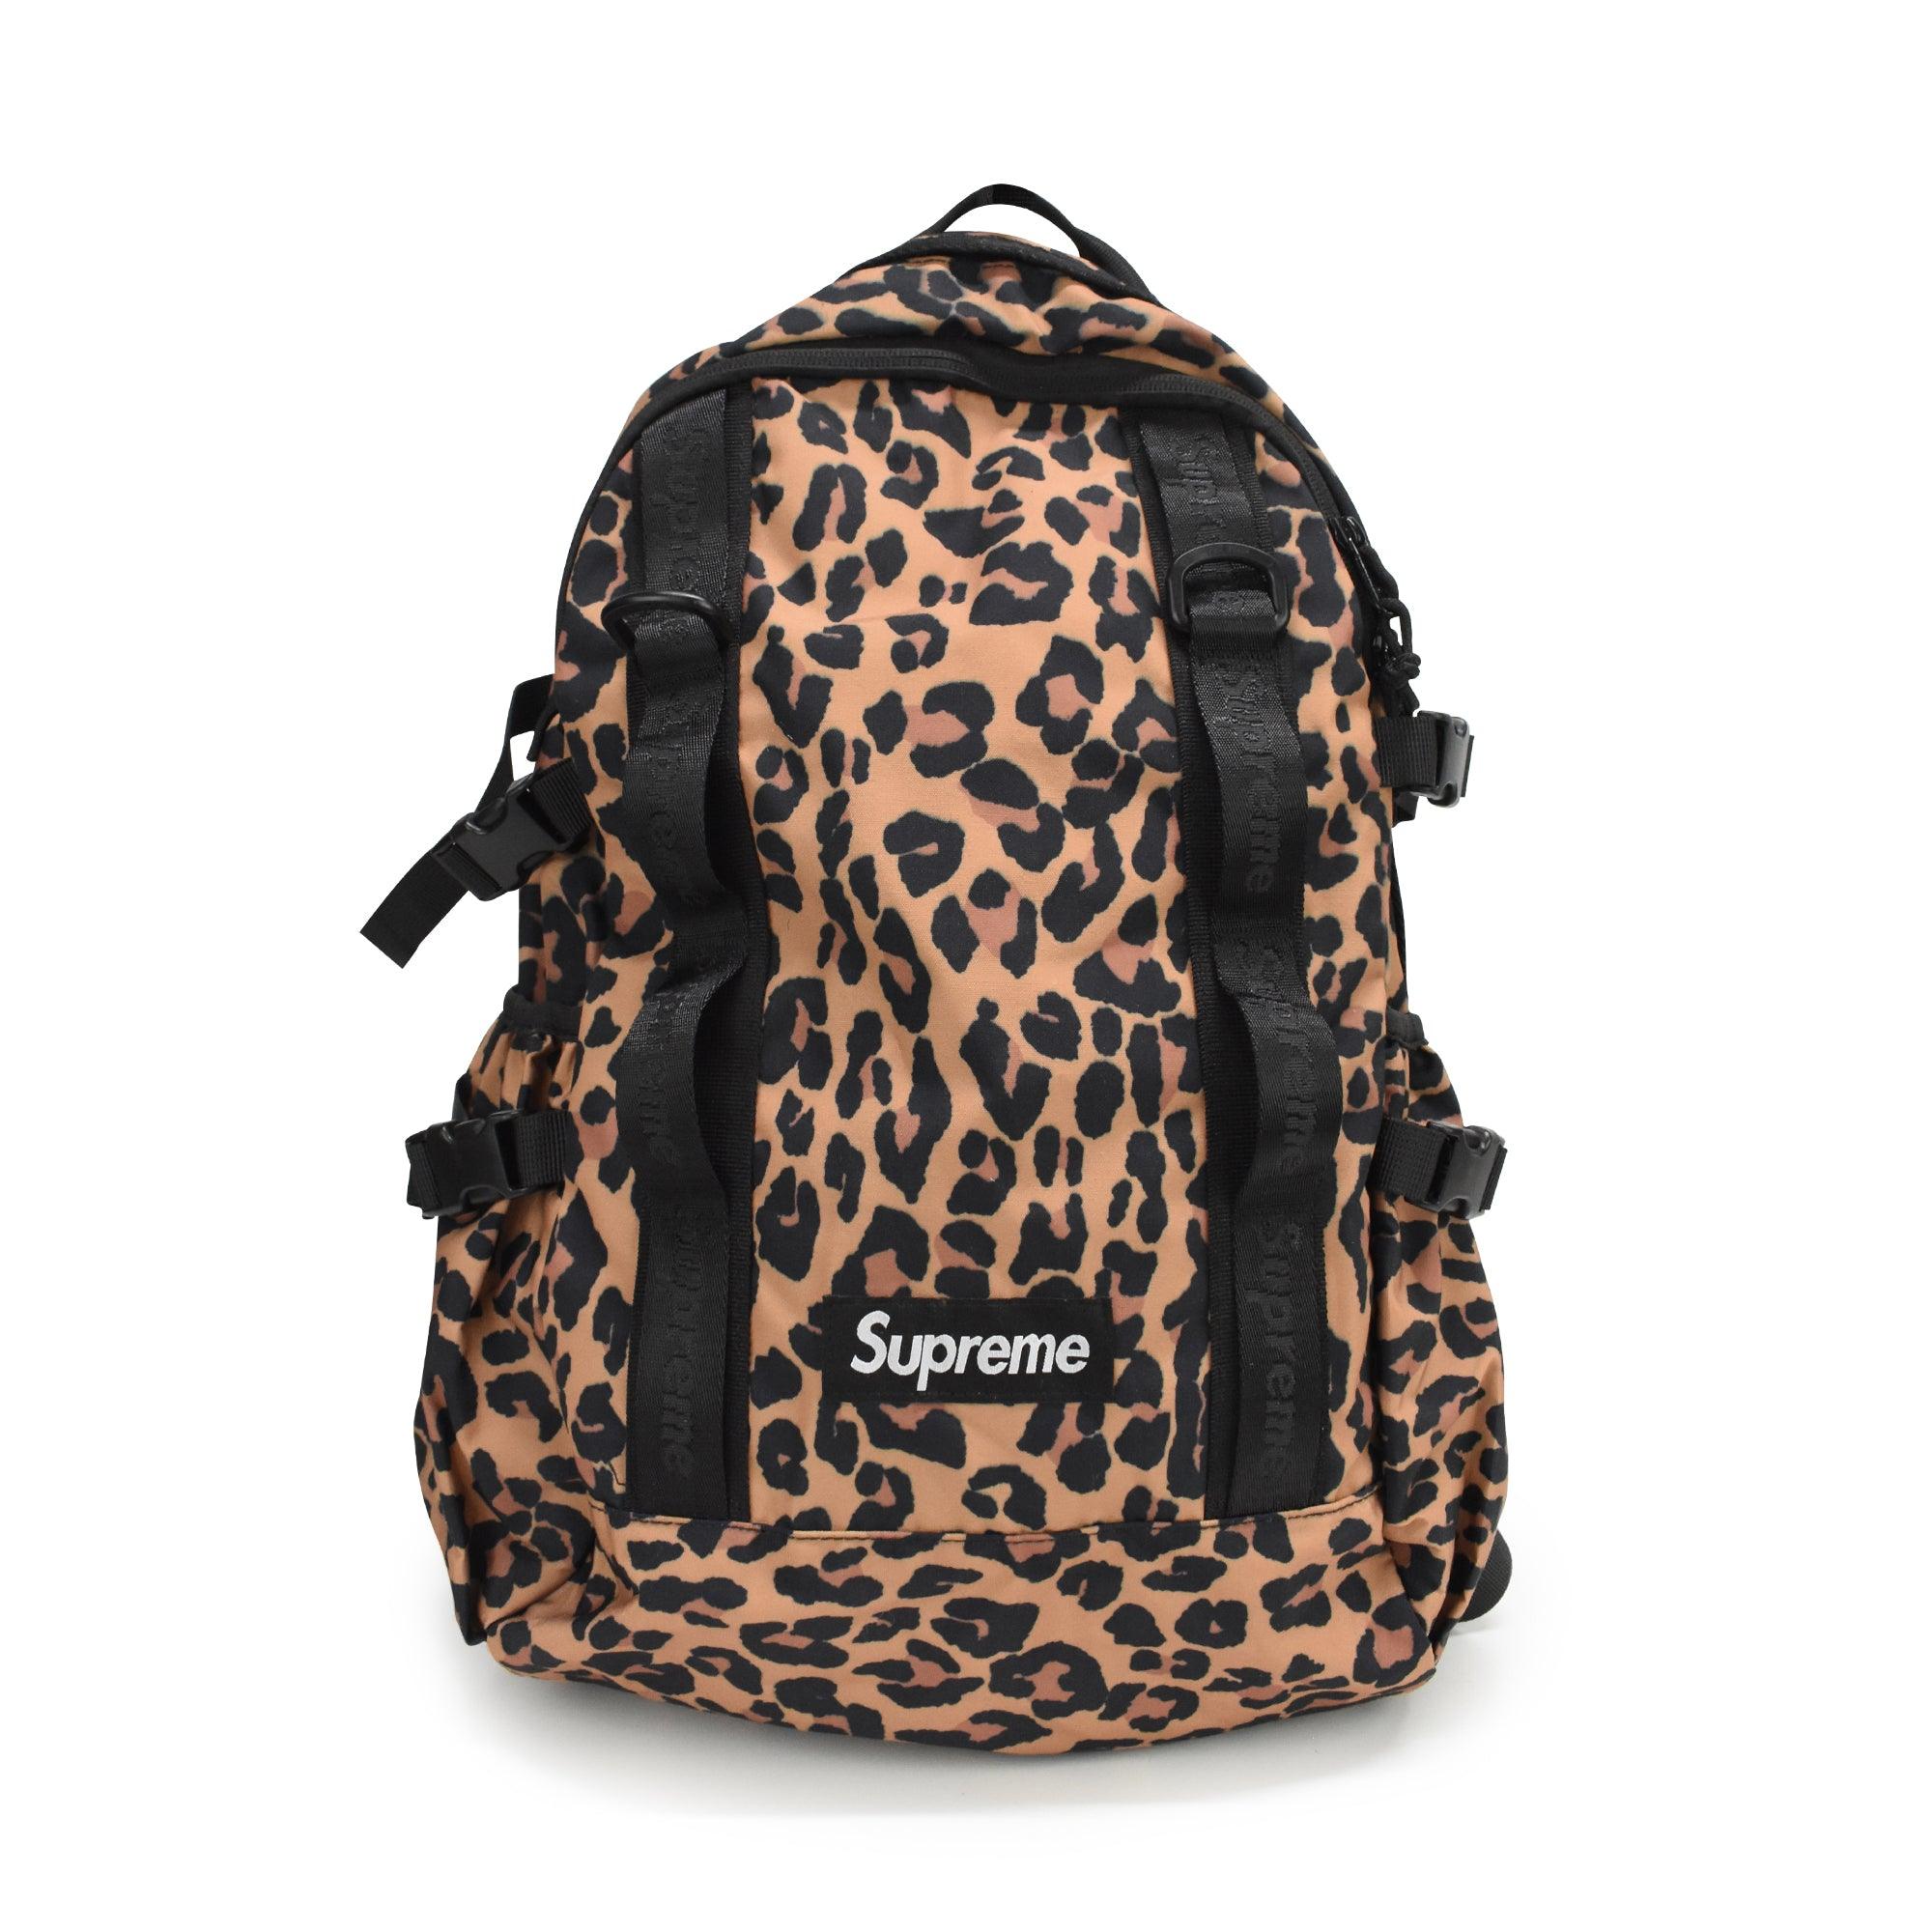 Supreme Backpack - Fashionably Yours